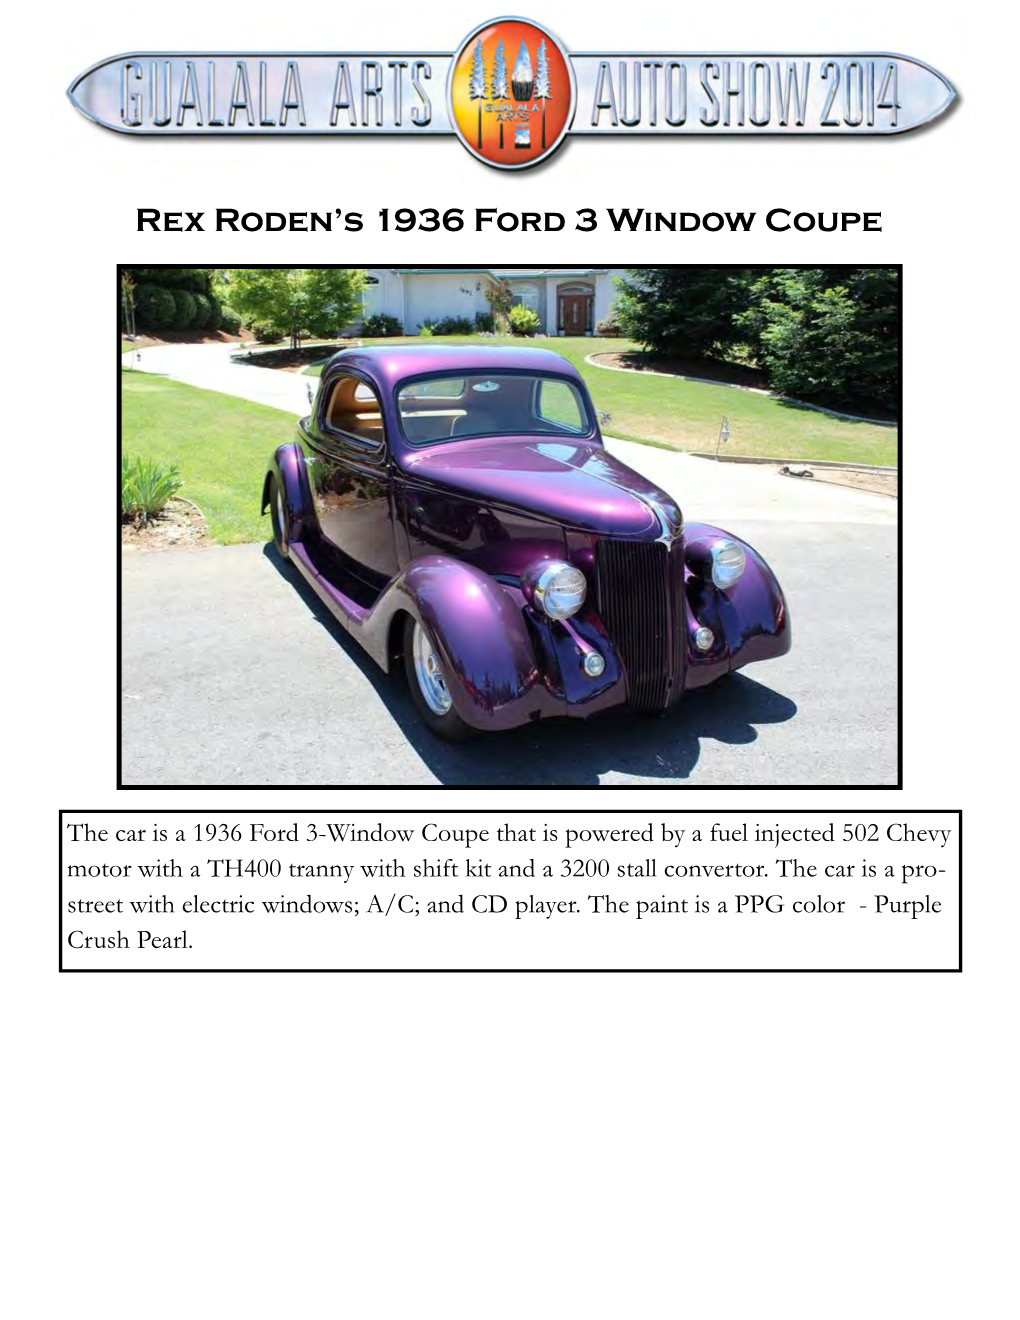 Rex Roden's 1936 Ford 3 Window Coupe